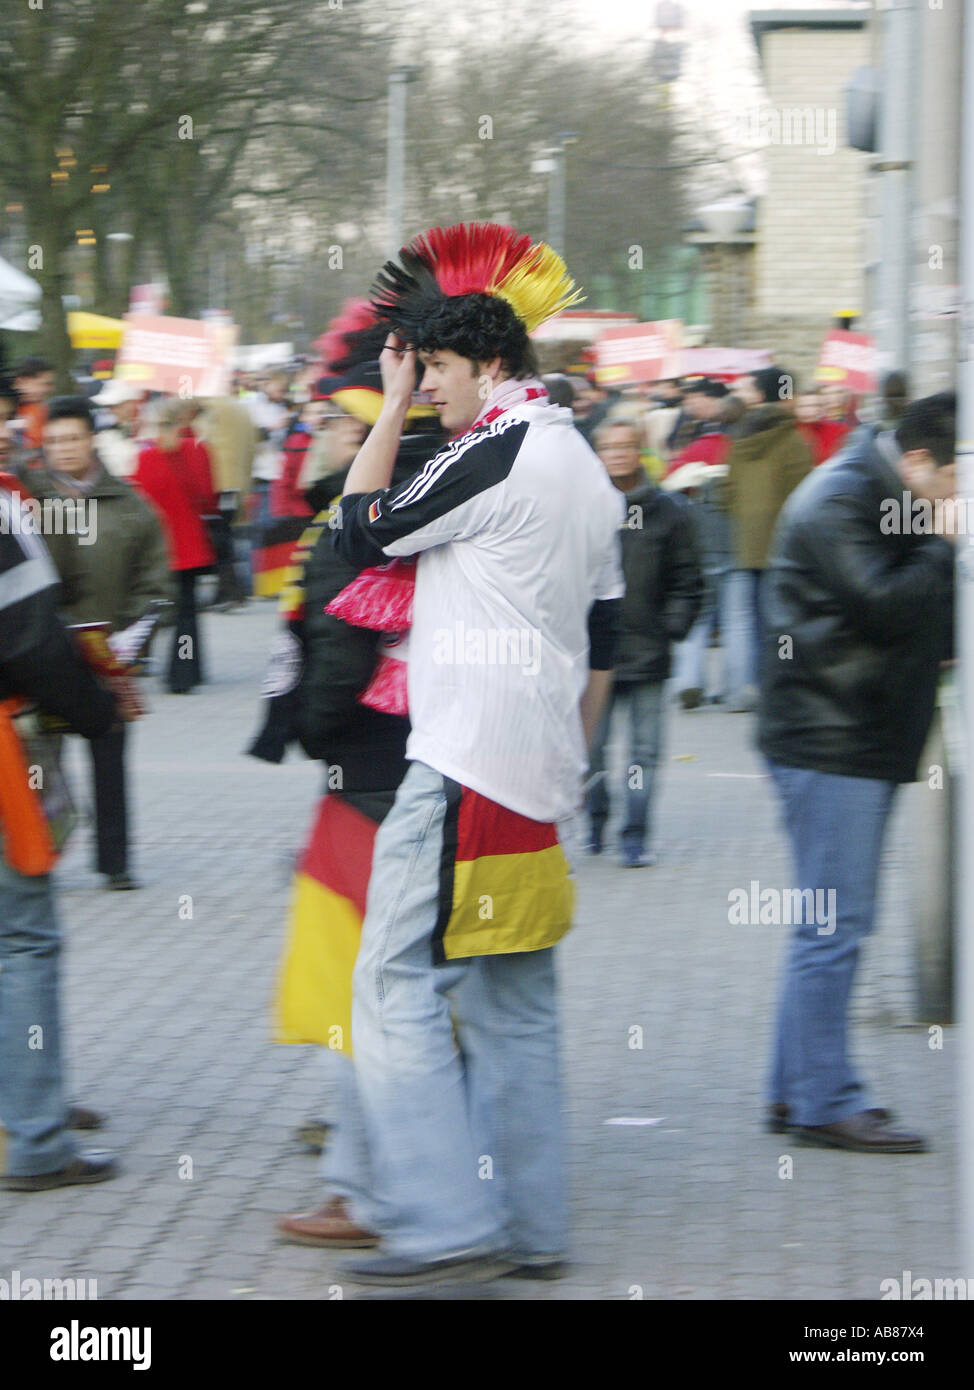 football fans waiting for game Germany against USA, Germany Stock Photo